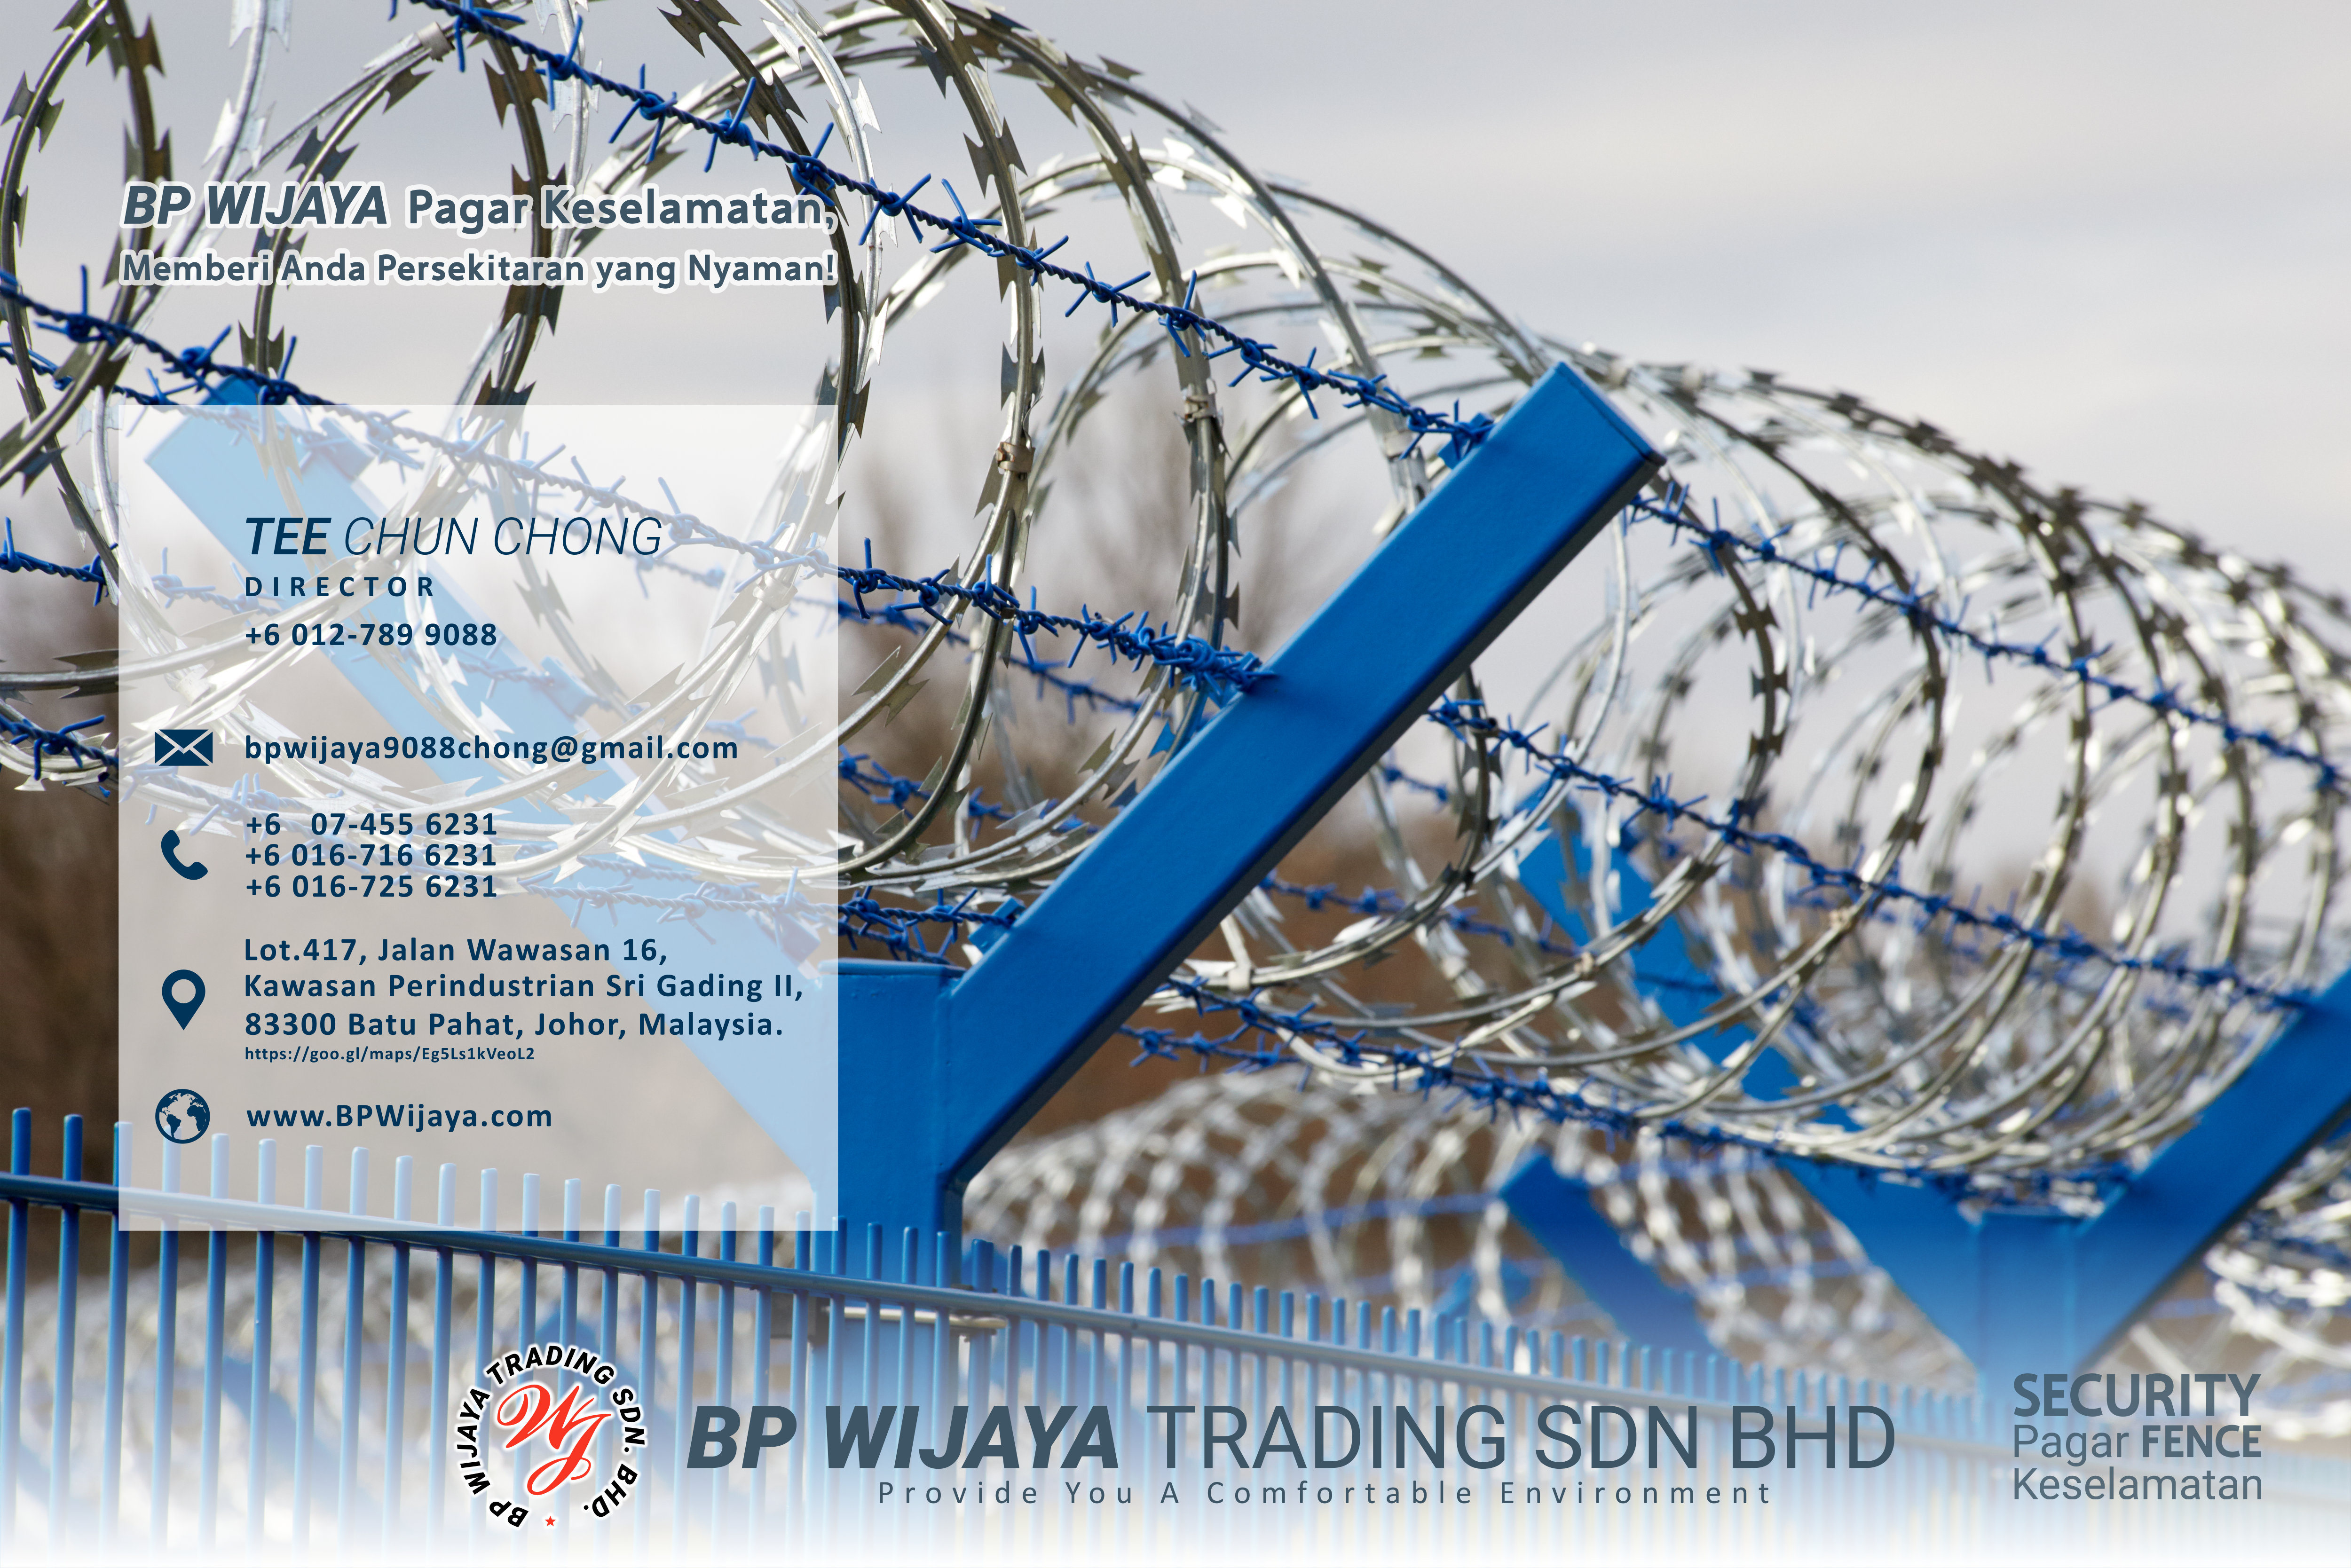 BP Wijaya Trading Sdn Bhd Fence Malaysia Selangor Kuala Lumpur manufacturer of safety fences building materials for housing construction site Security fencing factory fence house fence A01-008